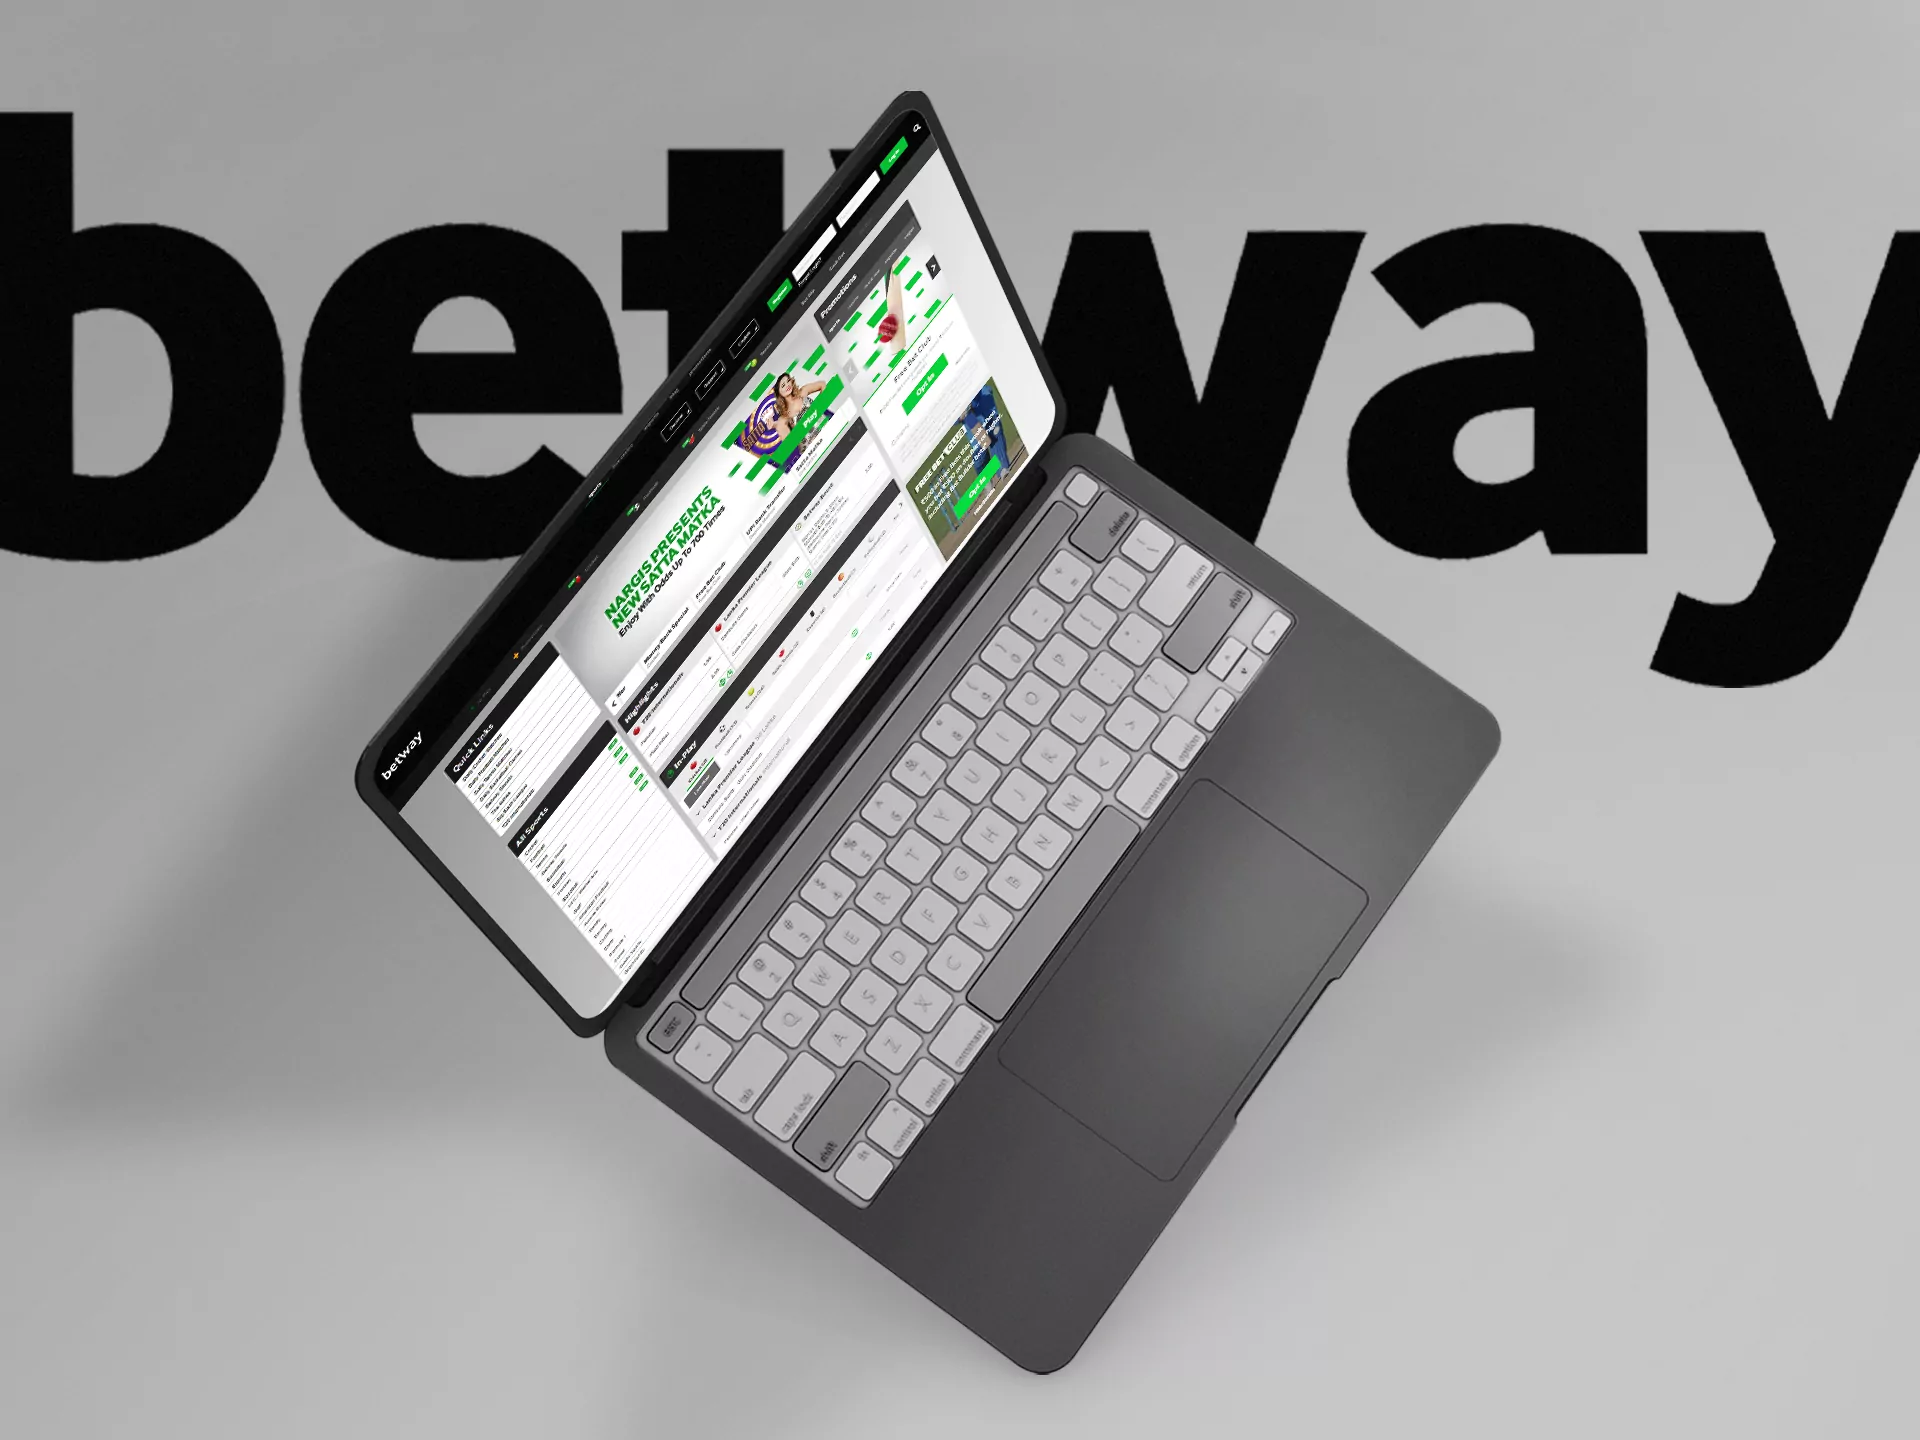 Betway is a world-famous bookmaker that accepts bets on cricket and other sports or cybersports matches.